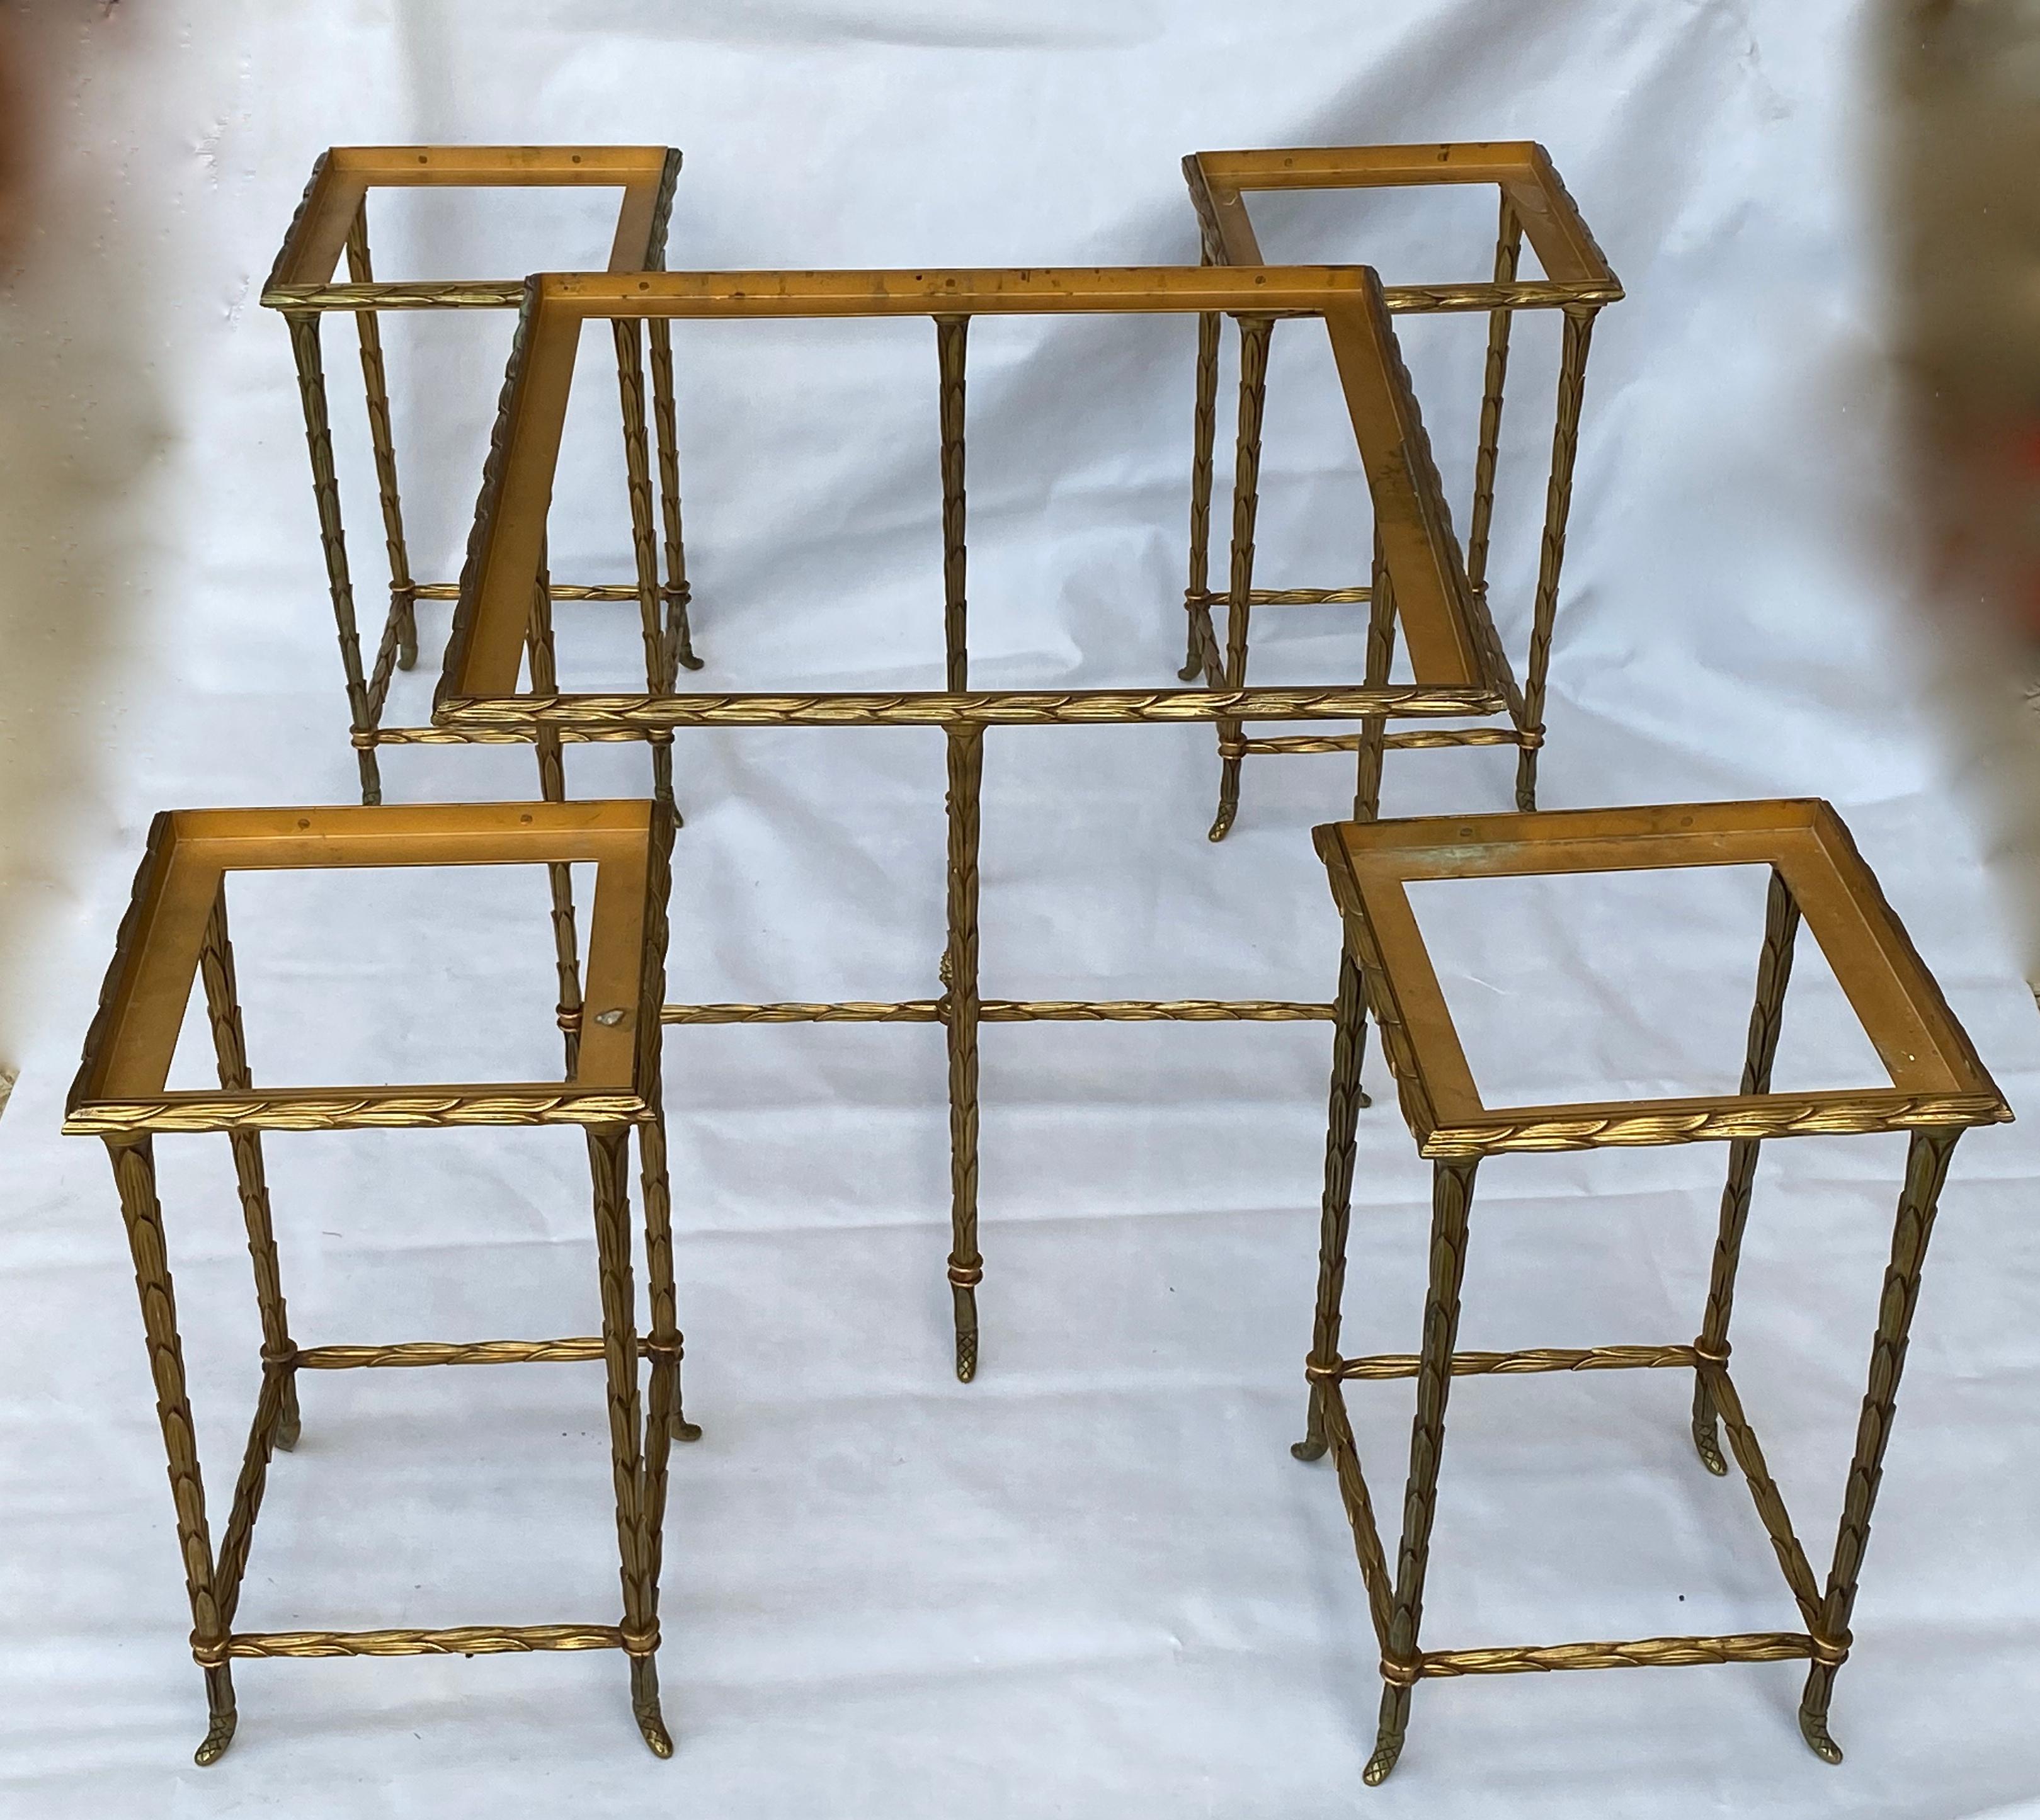 Square coffee table including 4 small tables dimensioned 28 X 28 X H 45 cm, good condition, Circa 1970, All pîeces are screwed, in belt molding in the shape of bay leaves, spacer with pine cones
The trays are in aged oxidized mirror
Factory Maison